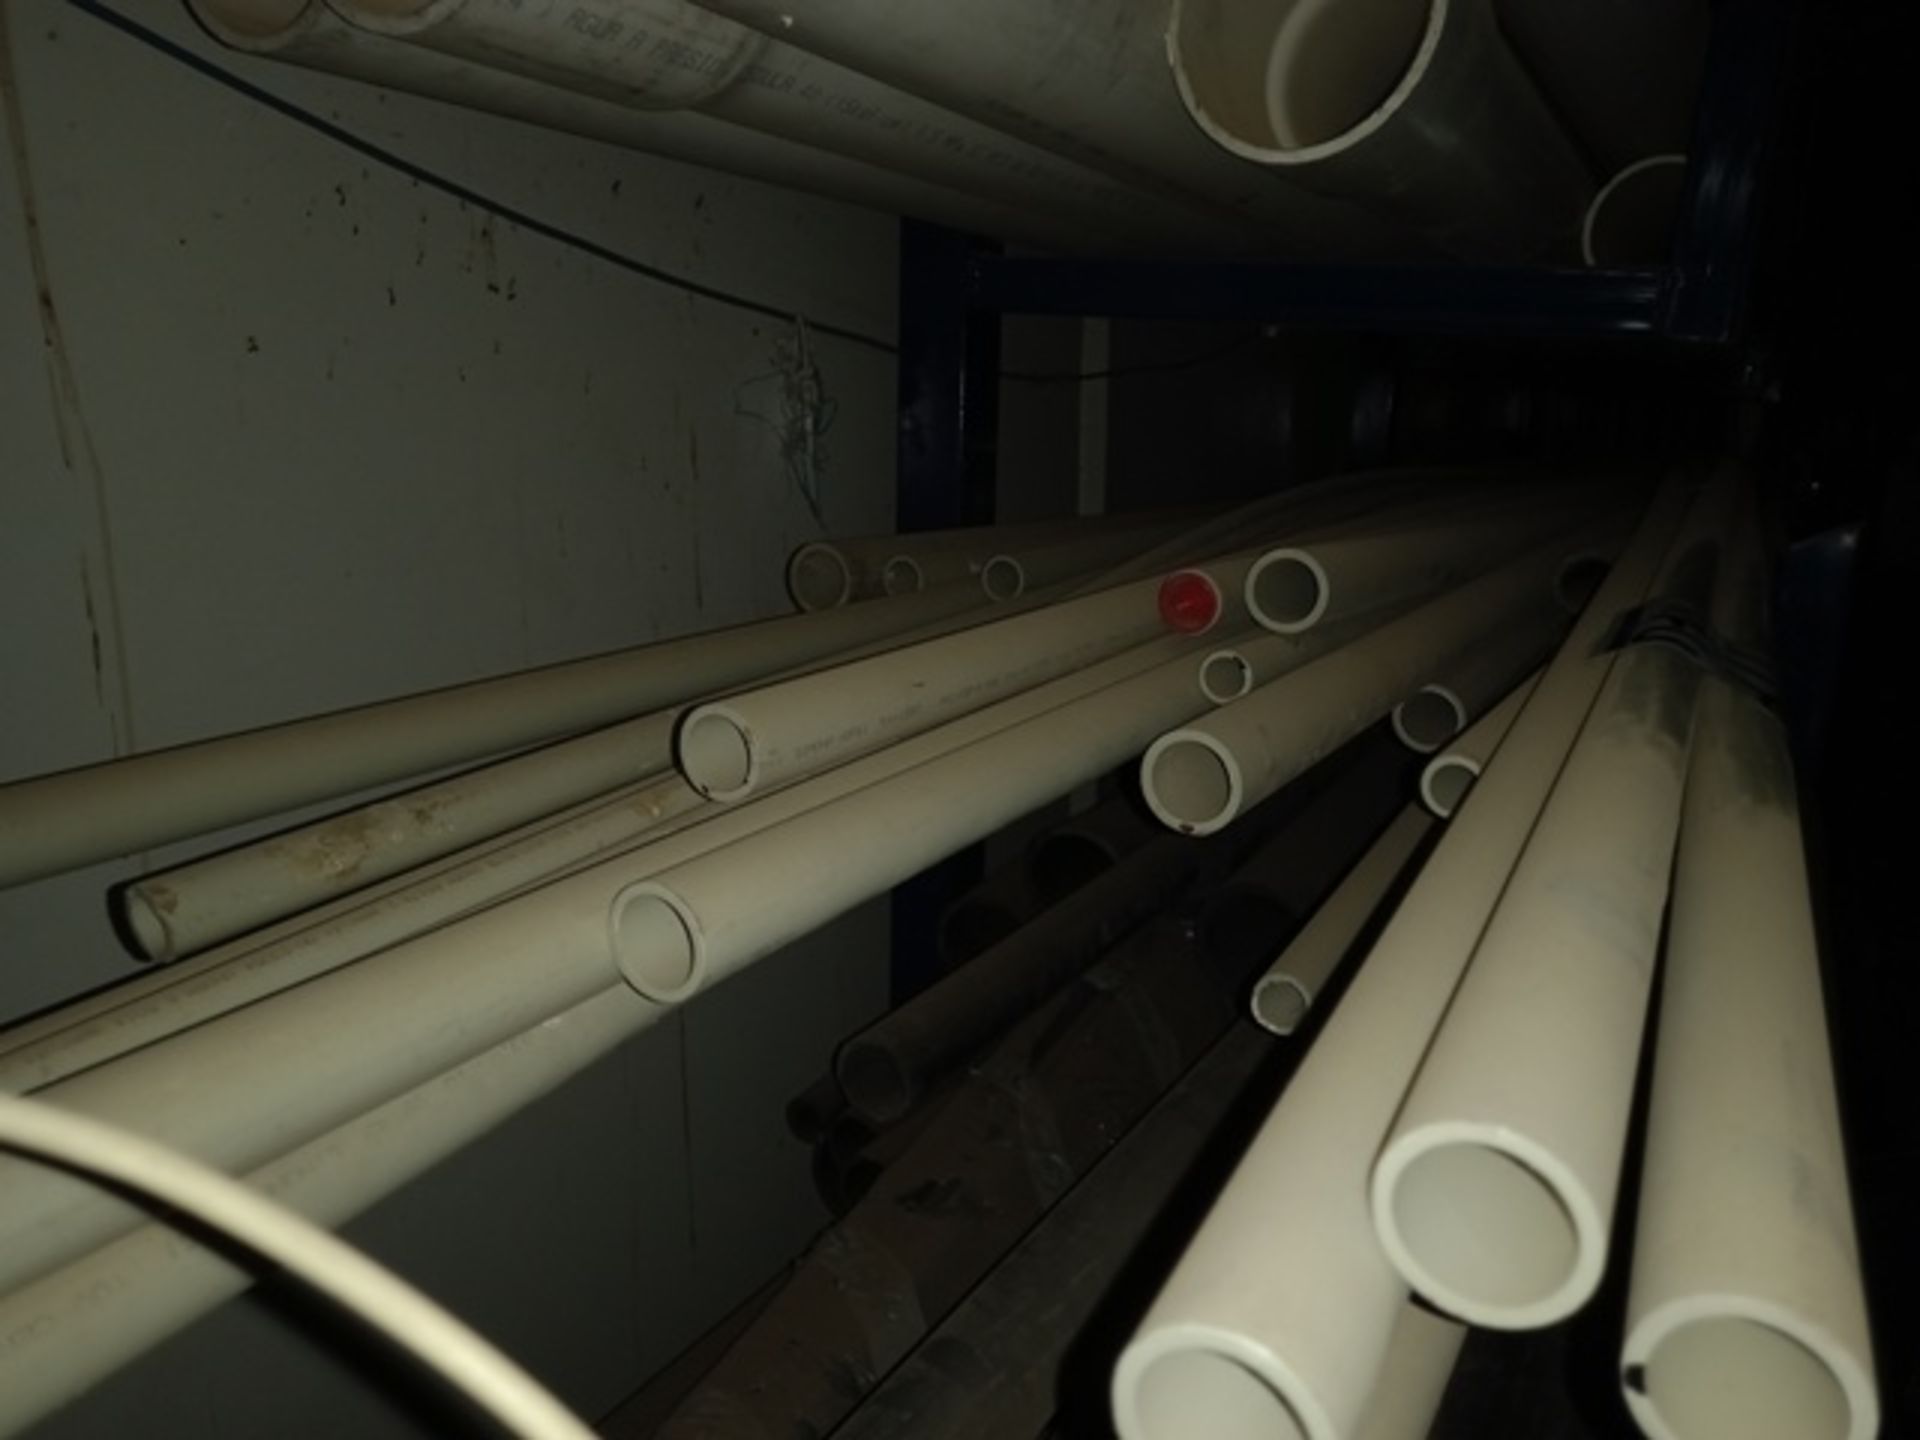 Lot of (1) Metallic Rack with Hydraulic PVC Pipe, Different Sizes (1" - 4") - Image 3 of 7